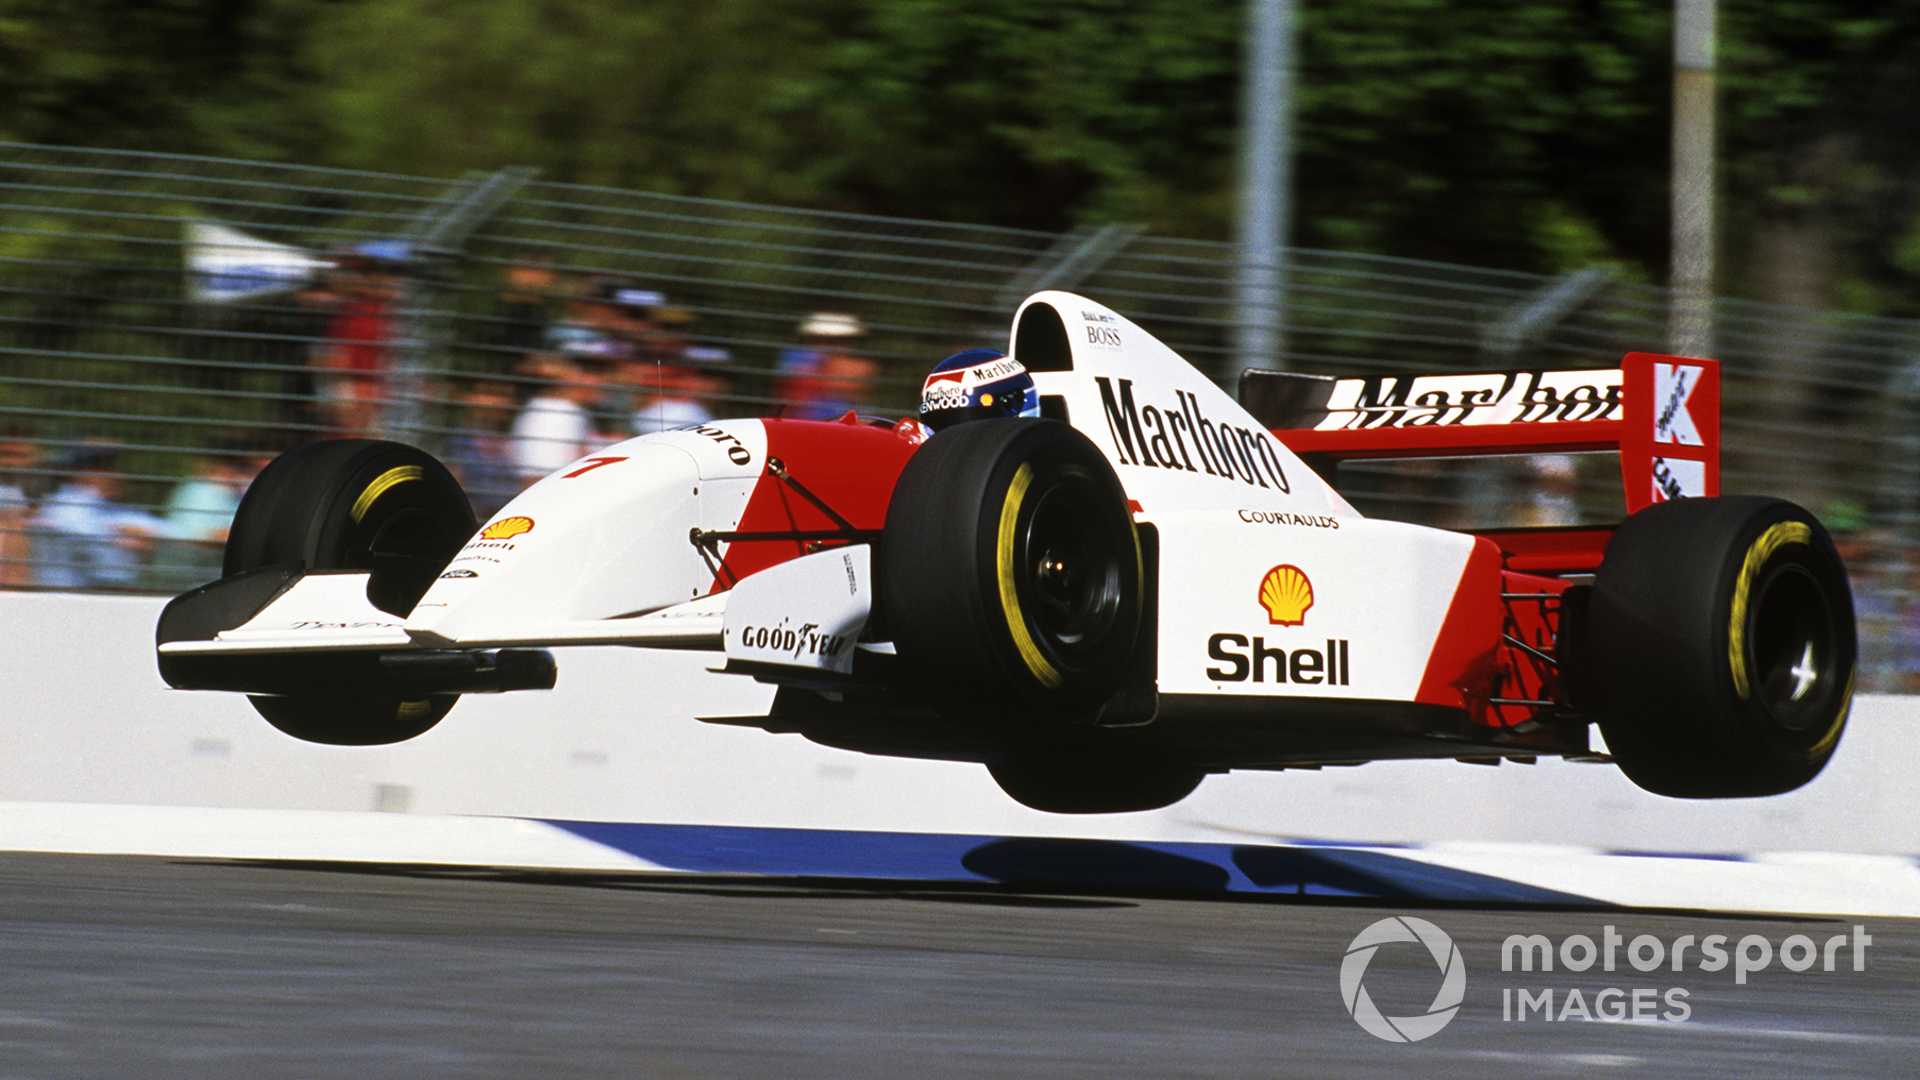 Mika Hakkinen Launches His Mclaren Mp4 Into The Air At Malthouse